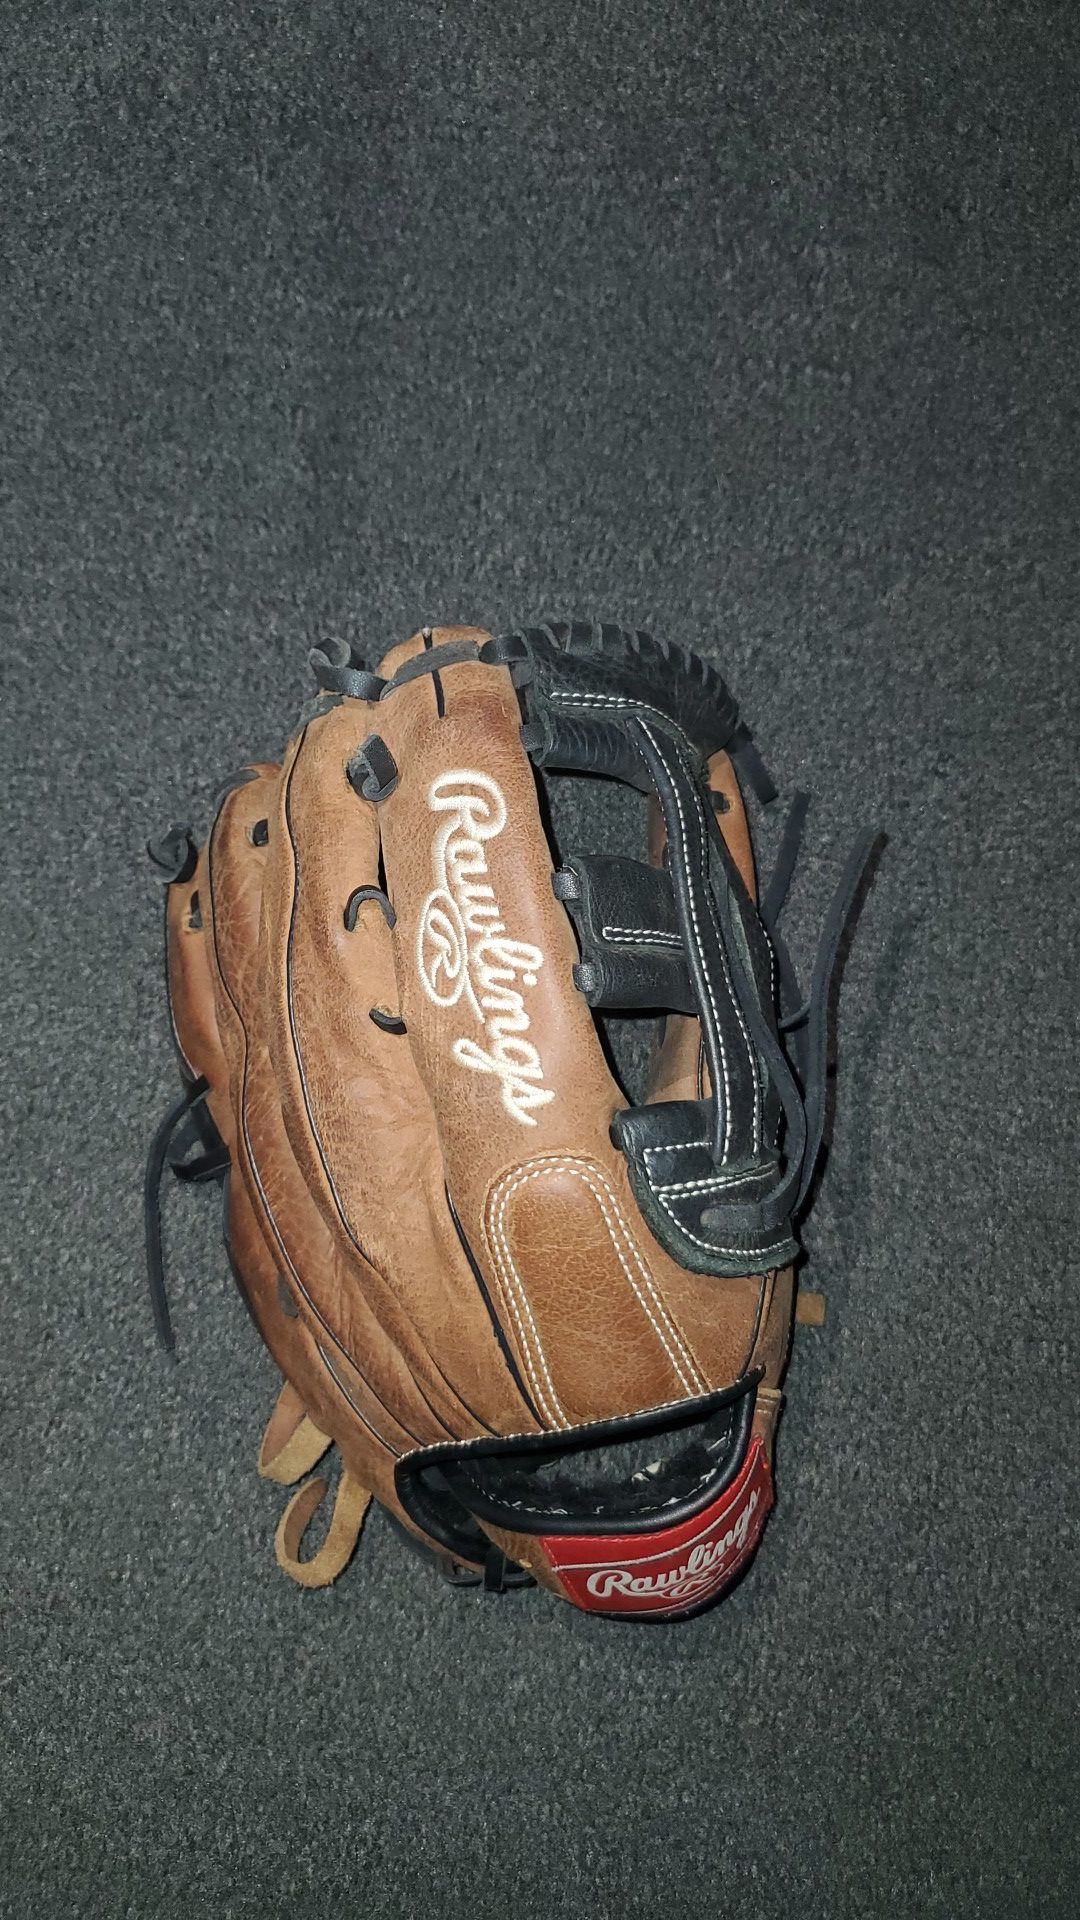 Rawlings outfield glove